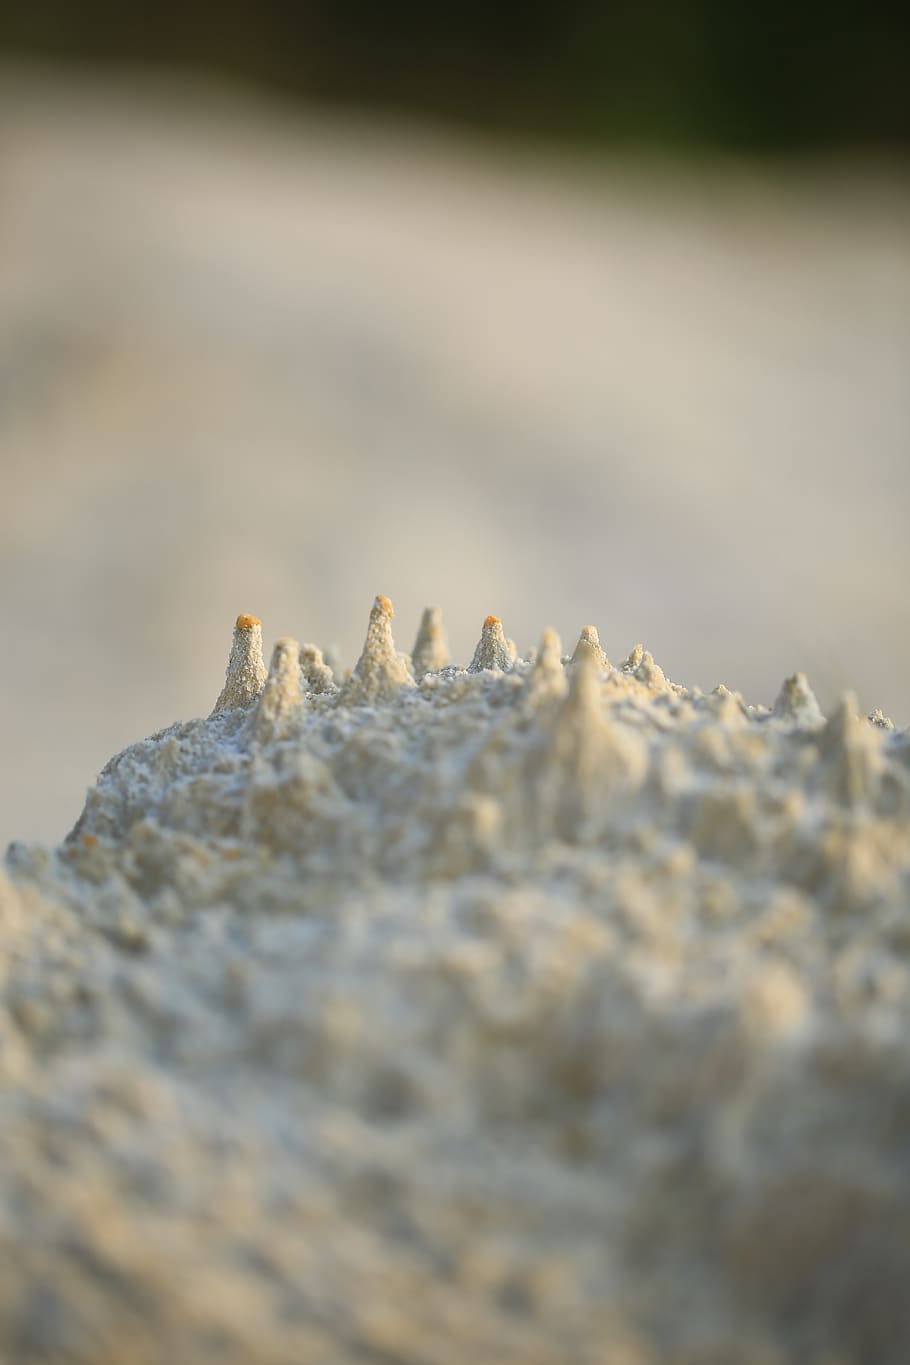 sand, stones, nature, mountains, kaolin, removal, weathered, selective focus, animals in the wild, animal wildlife